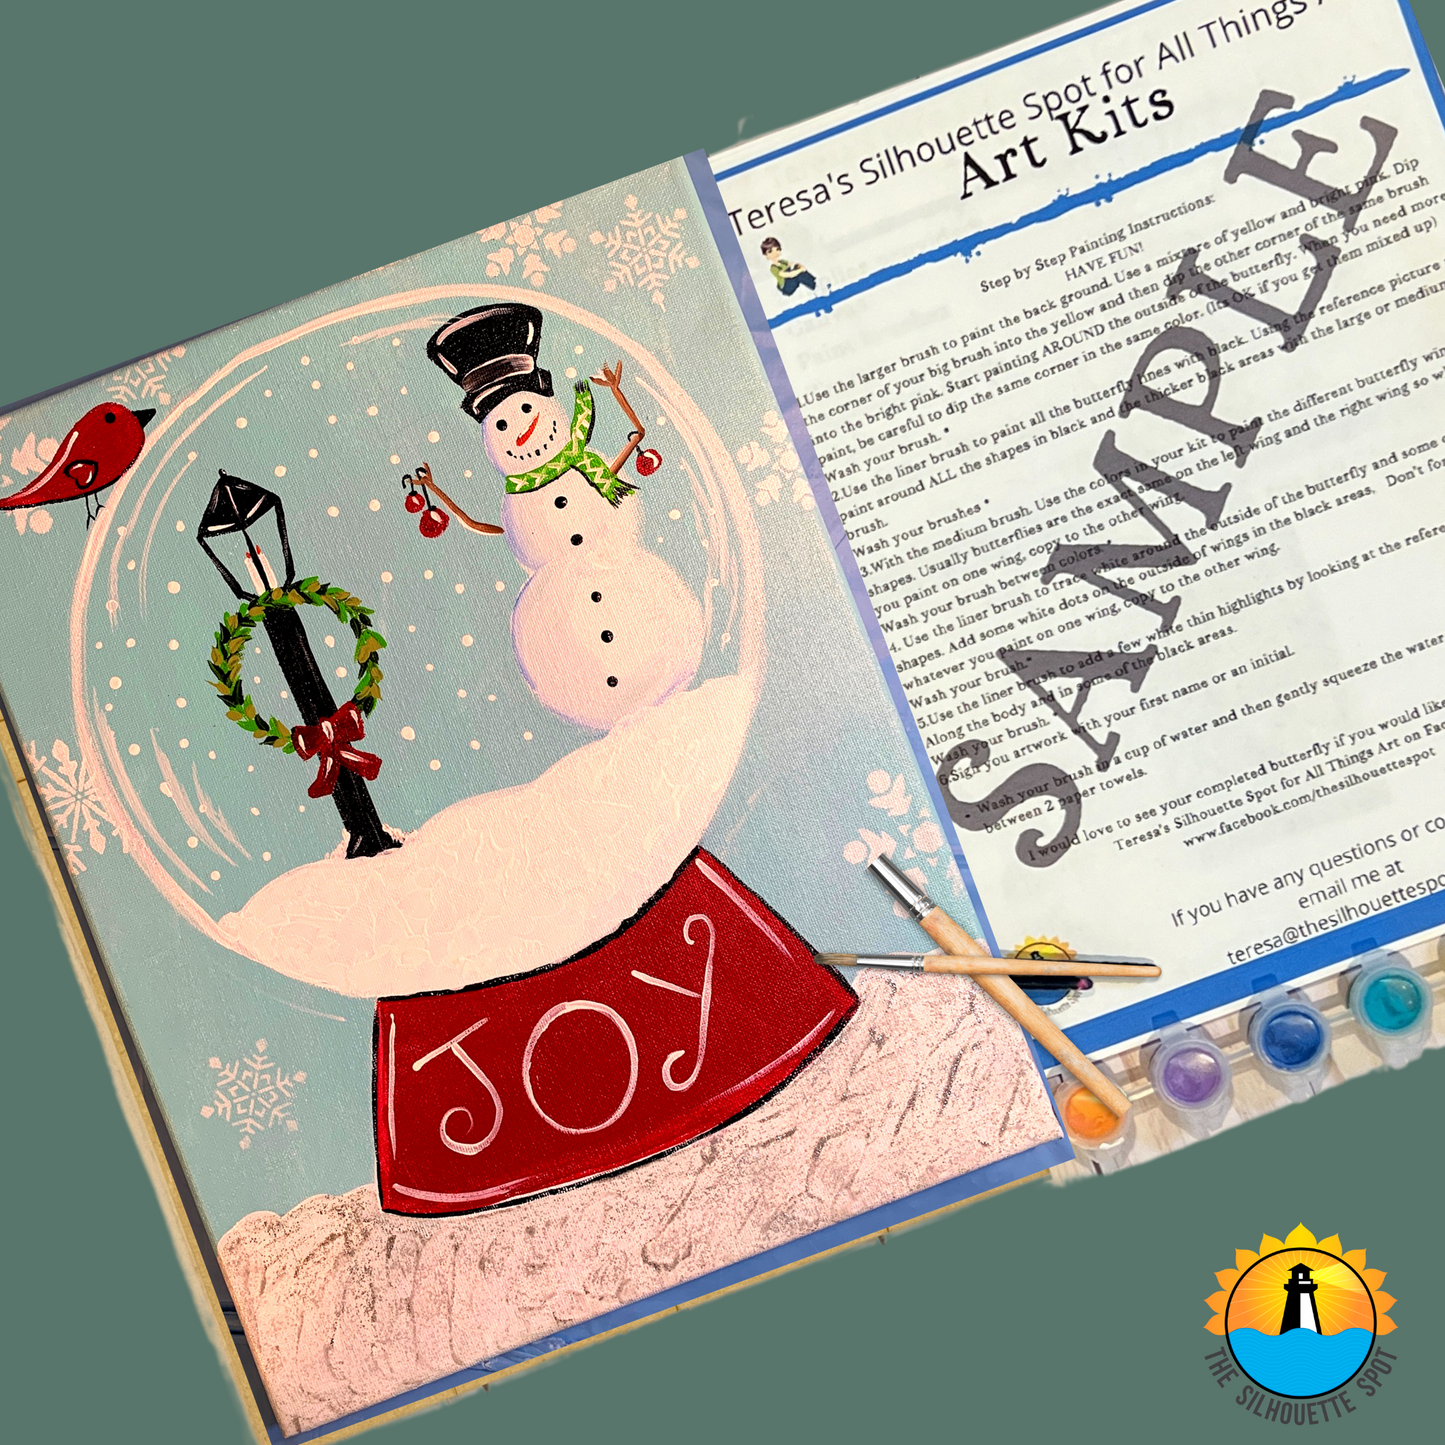 Snow Globe Snowman Scene Art Party Kit! At Home Paint Party Supplies! Beginner Friendly!